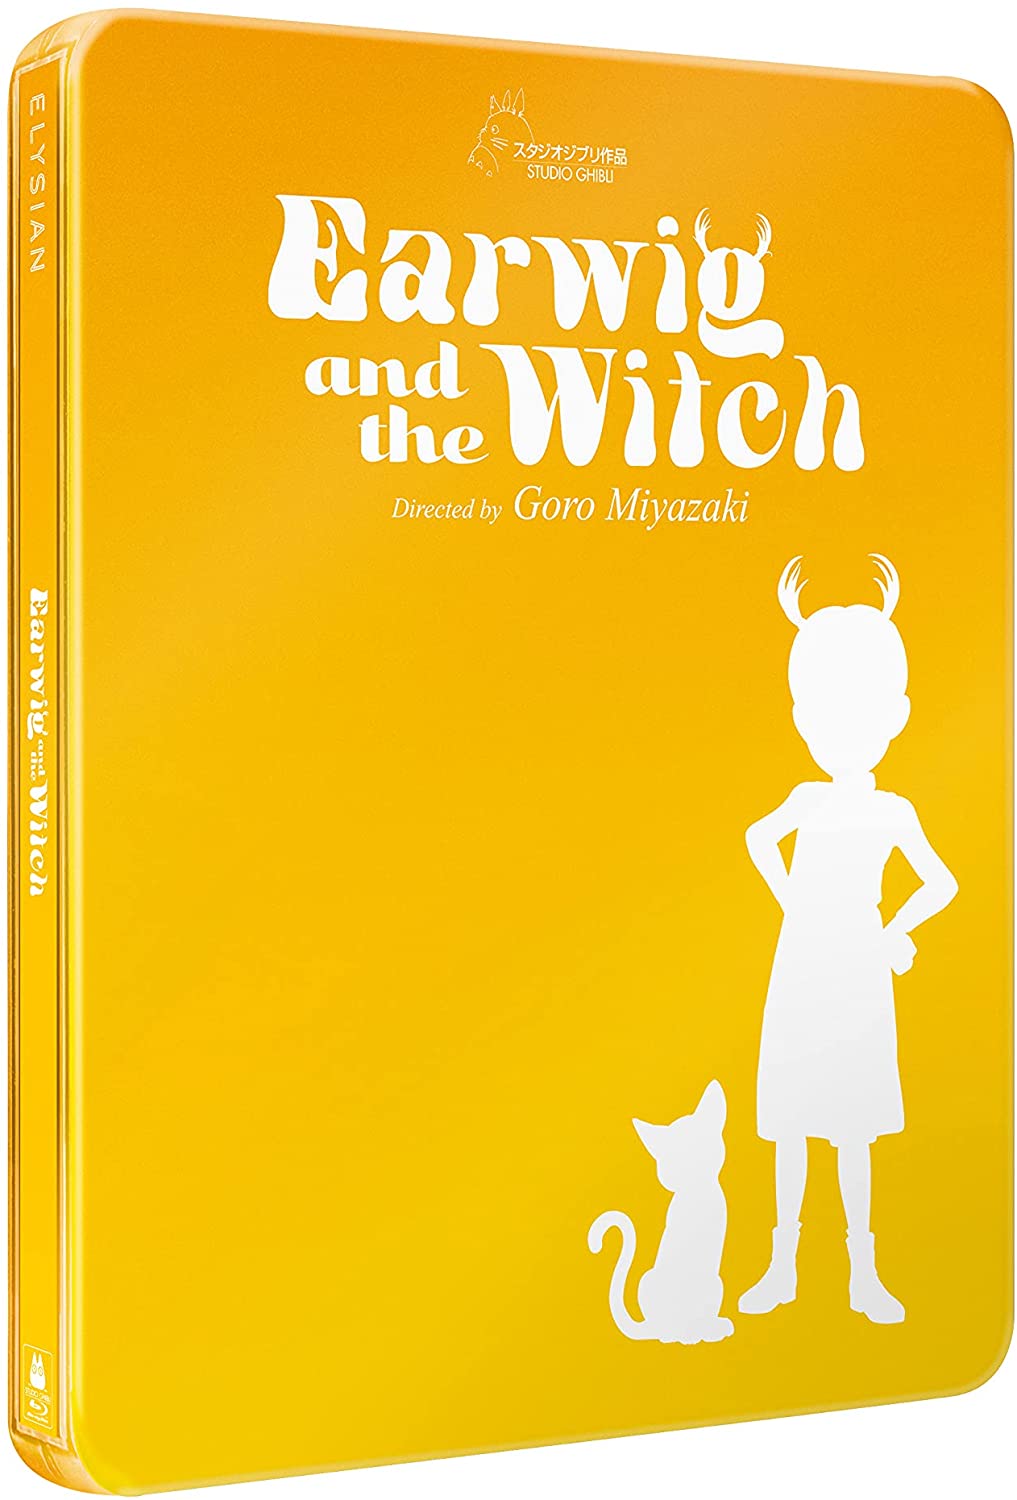 Earwig And The Witch - SteelBook - Fantasy/Anime [Blu-ray]